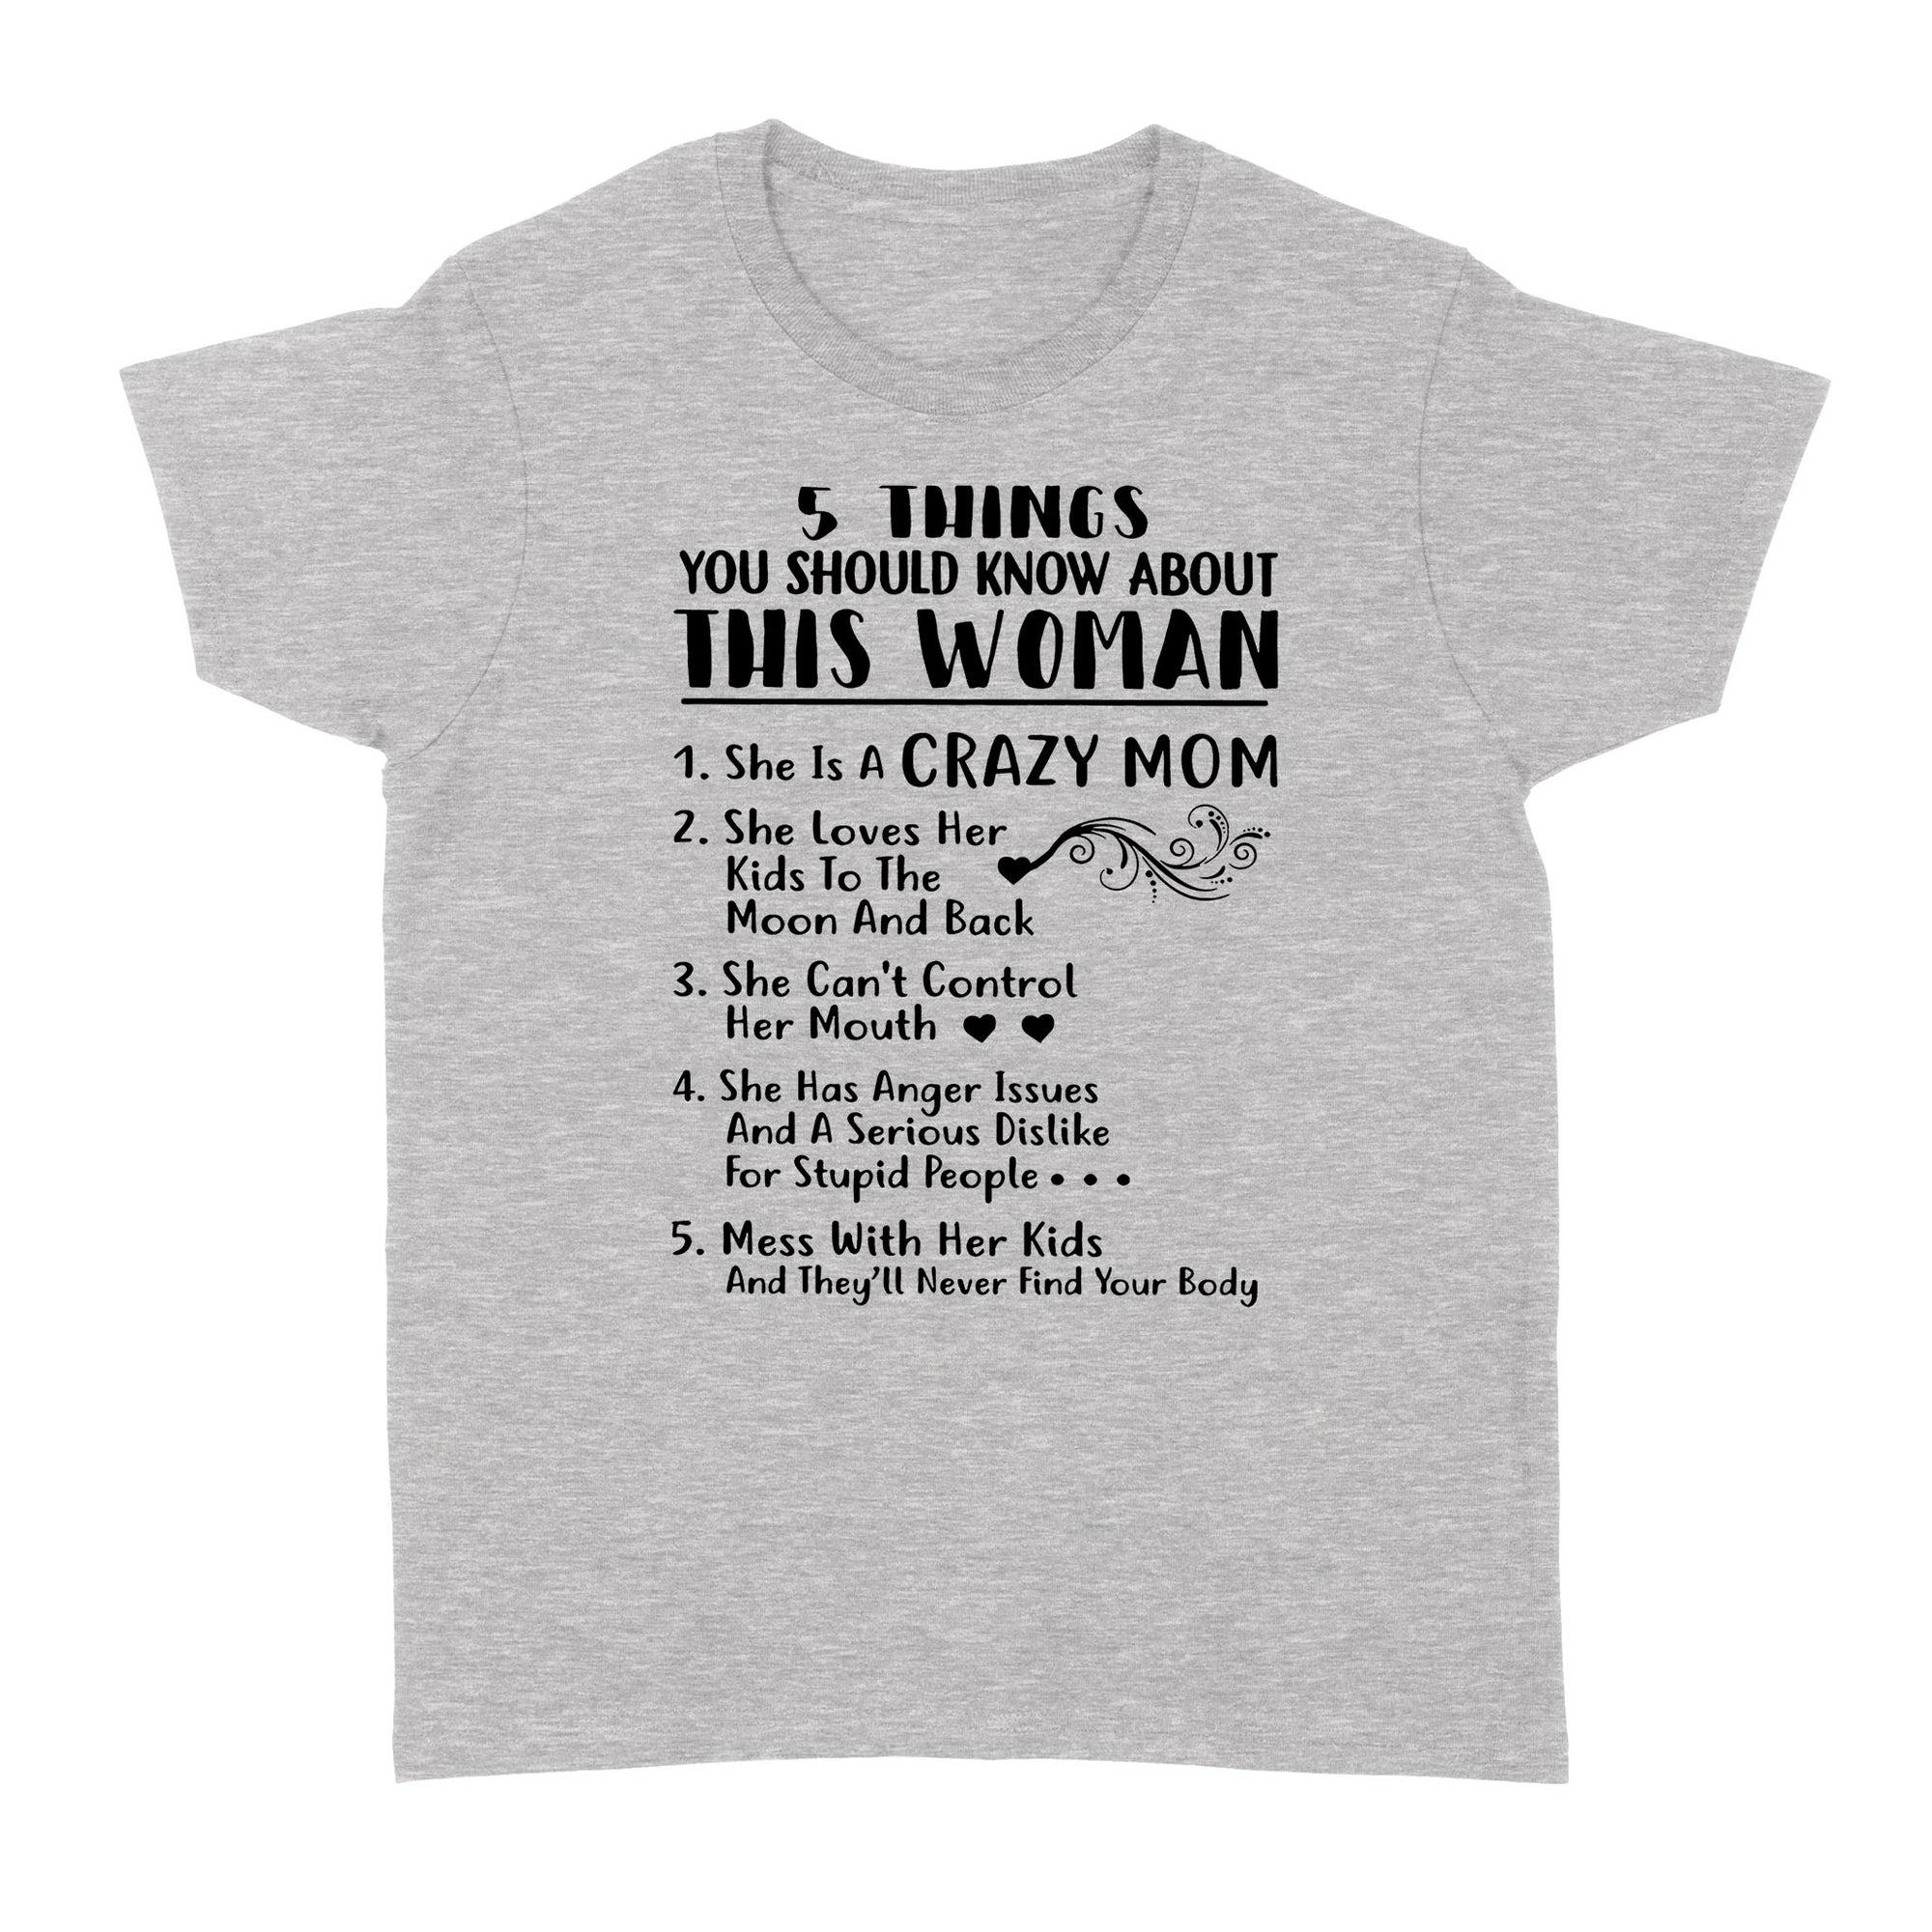 Gift Ideas for Mom Mothers Day 5 Things You Should Know About This Woman She Is A Crazy Mom She Loves Her Kids - Standard Women's T-shirt